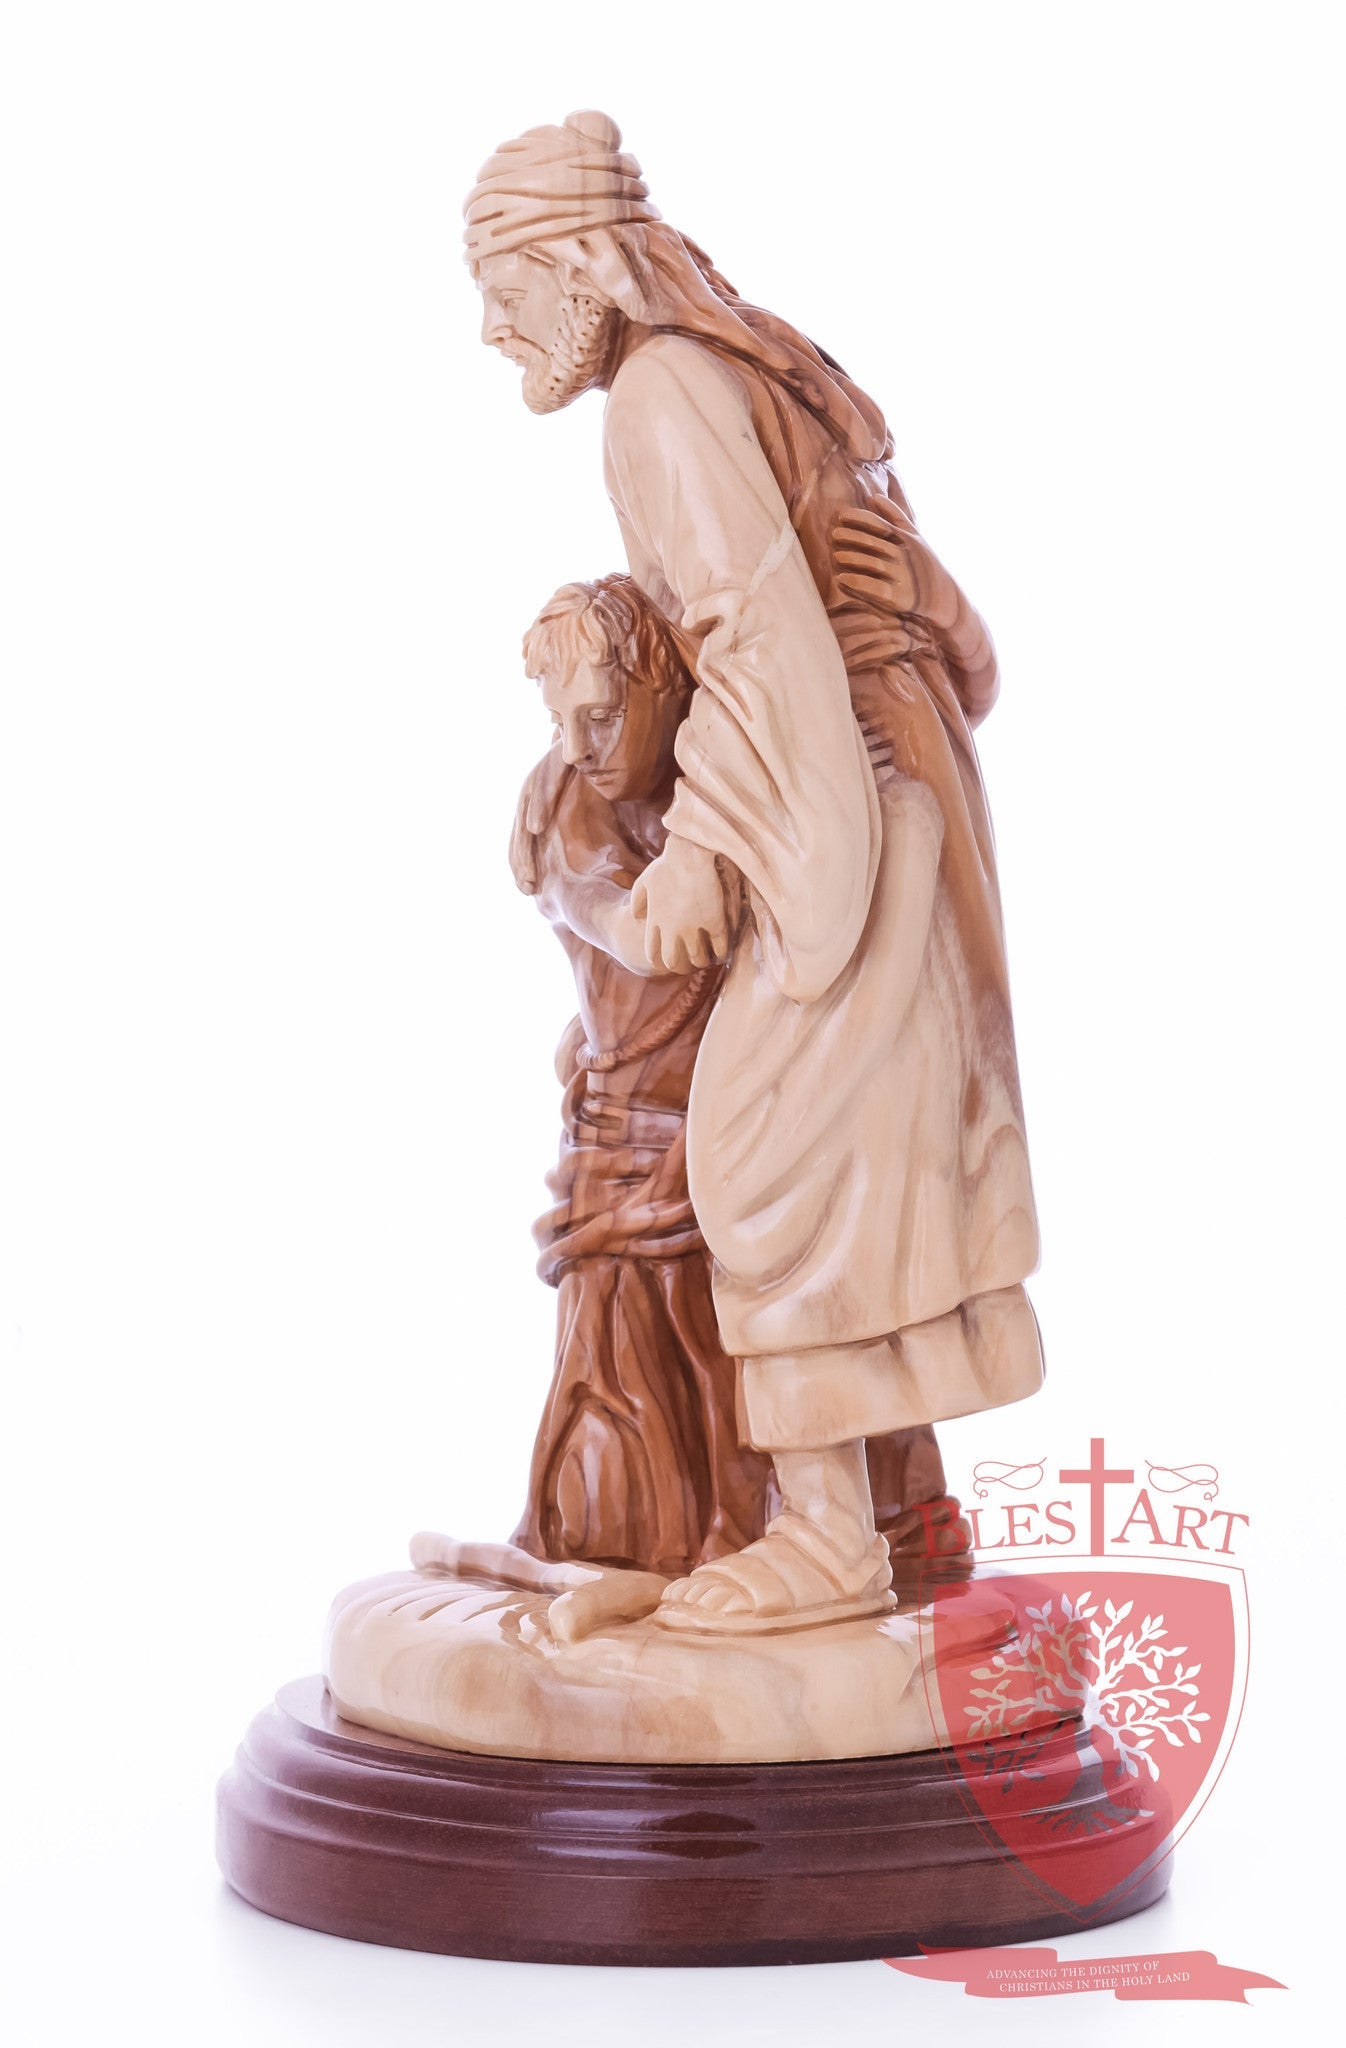 Jesus Healing the paralytic at Capernaum, Size: 10" /25.cm Height